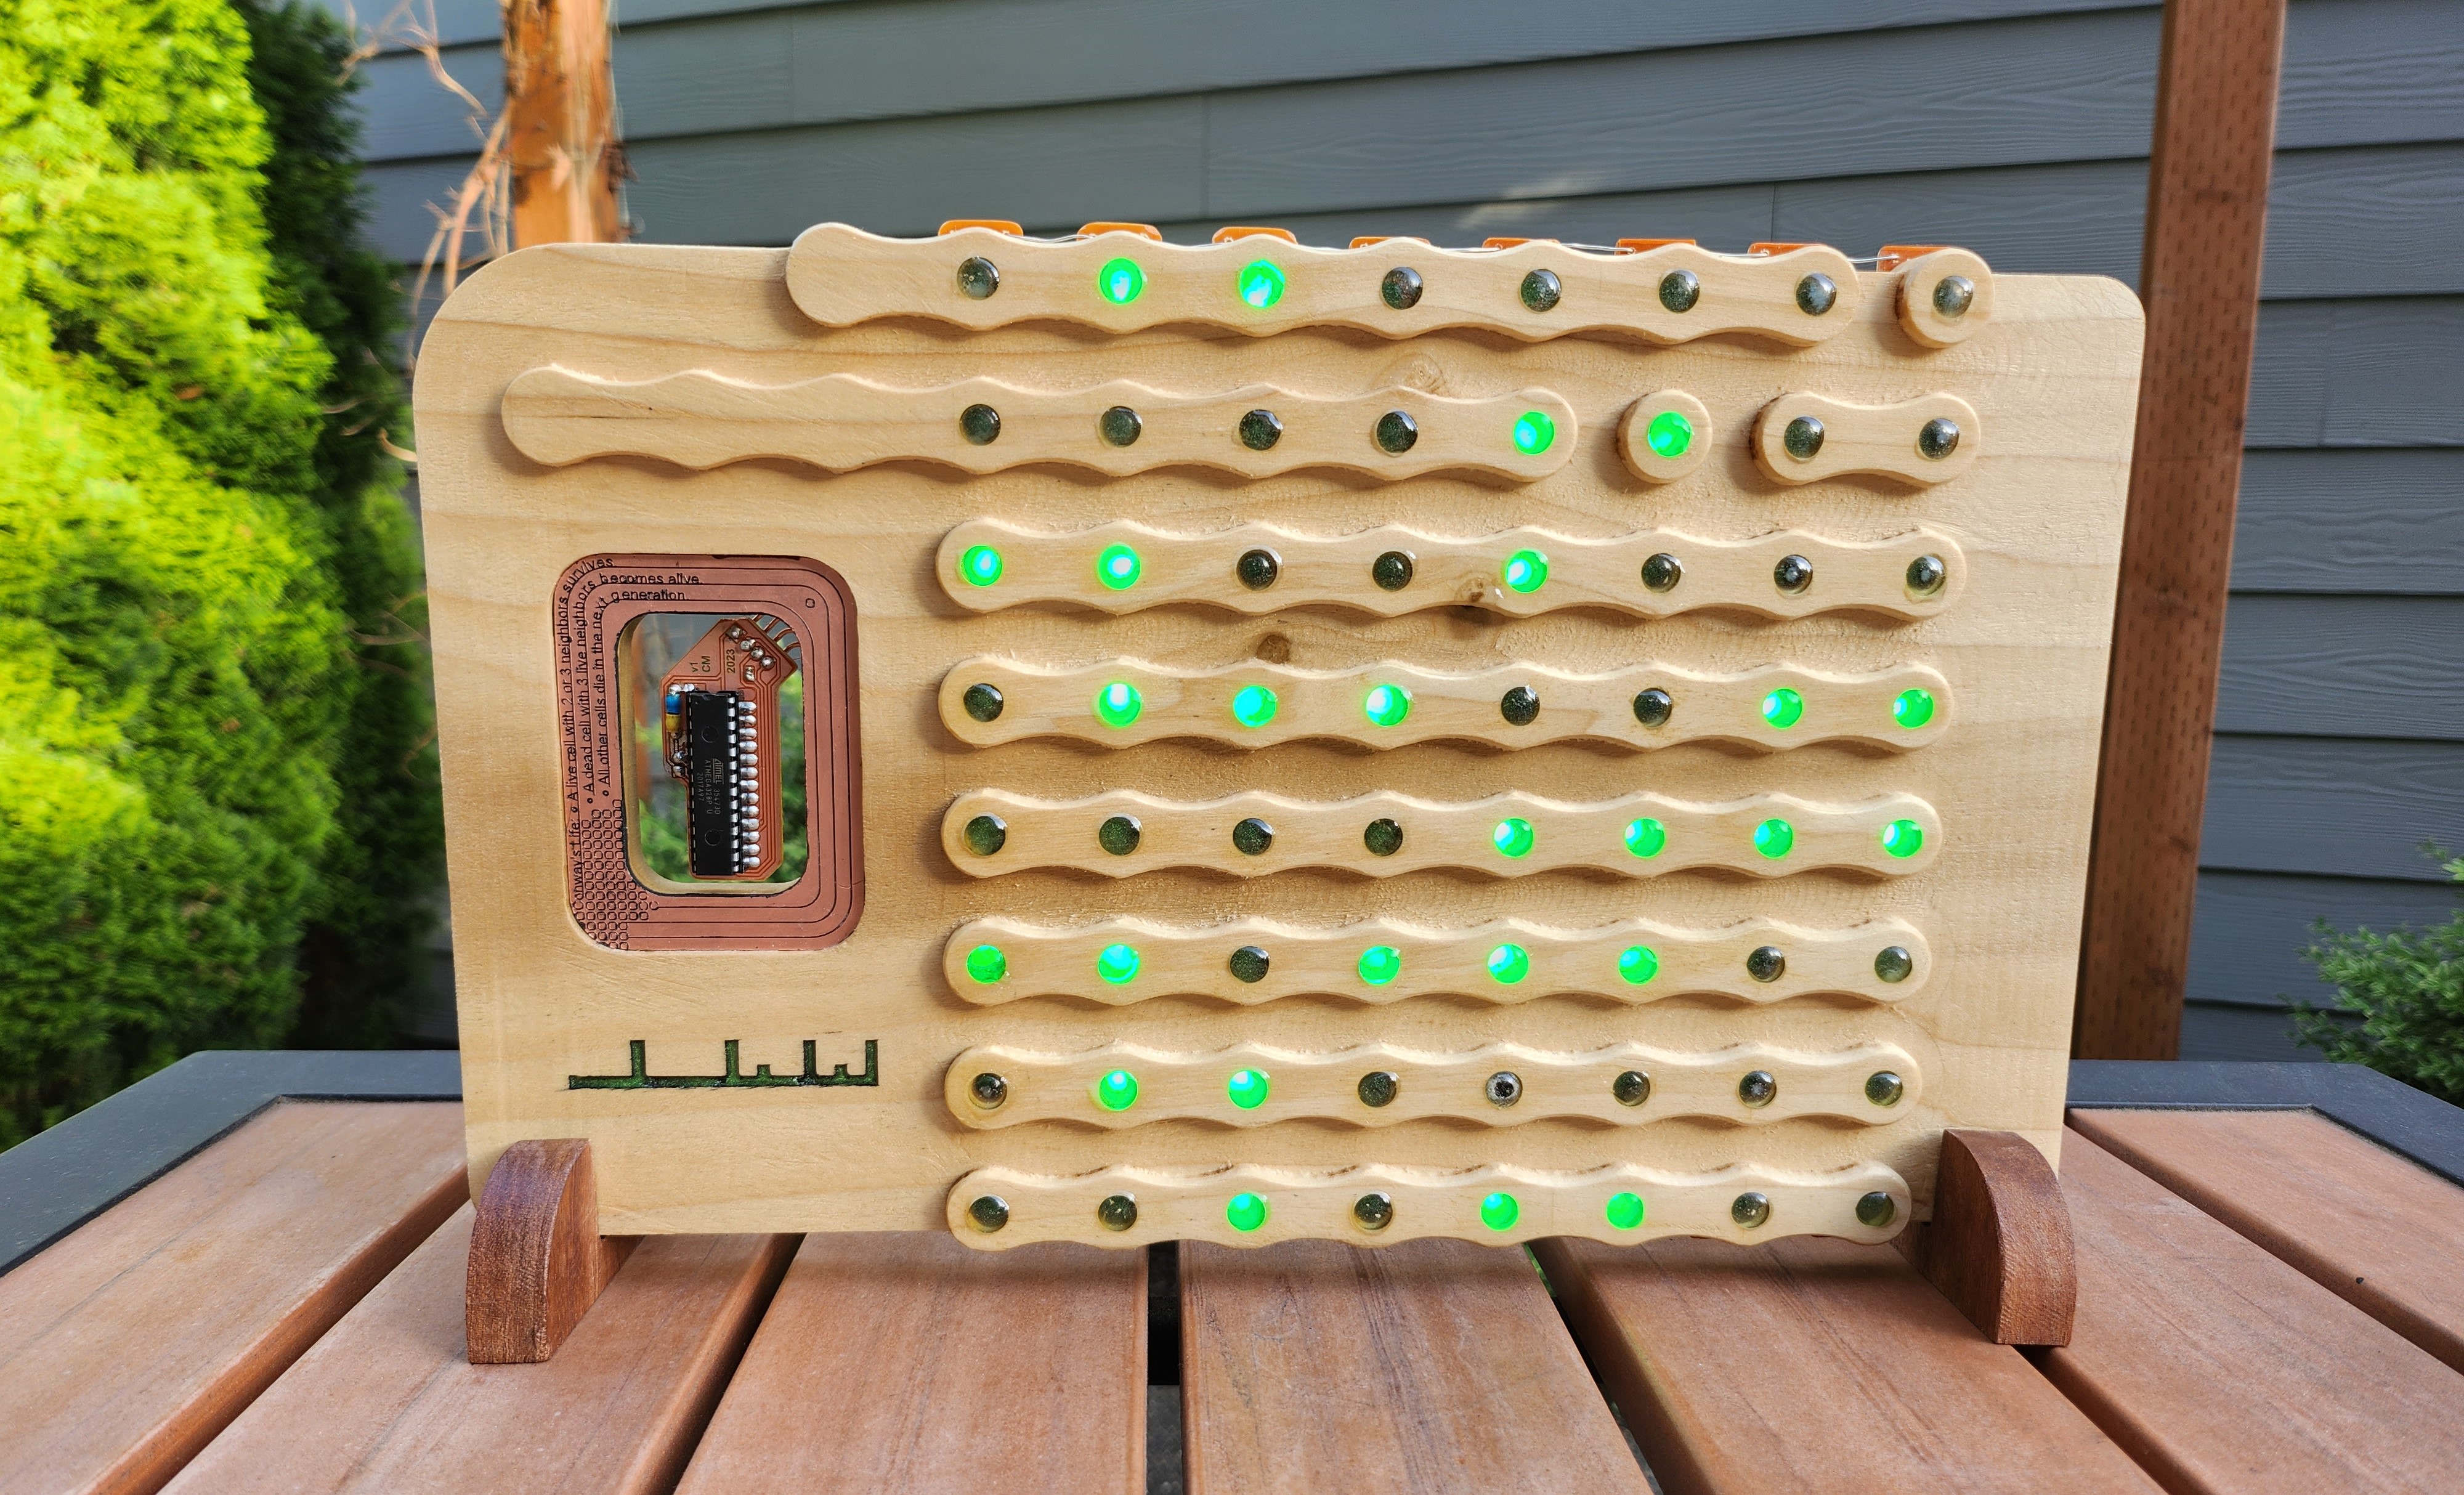 Wooden CNC carving features Conway's Game of Life